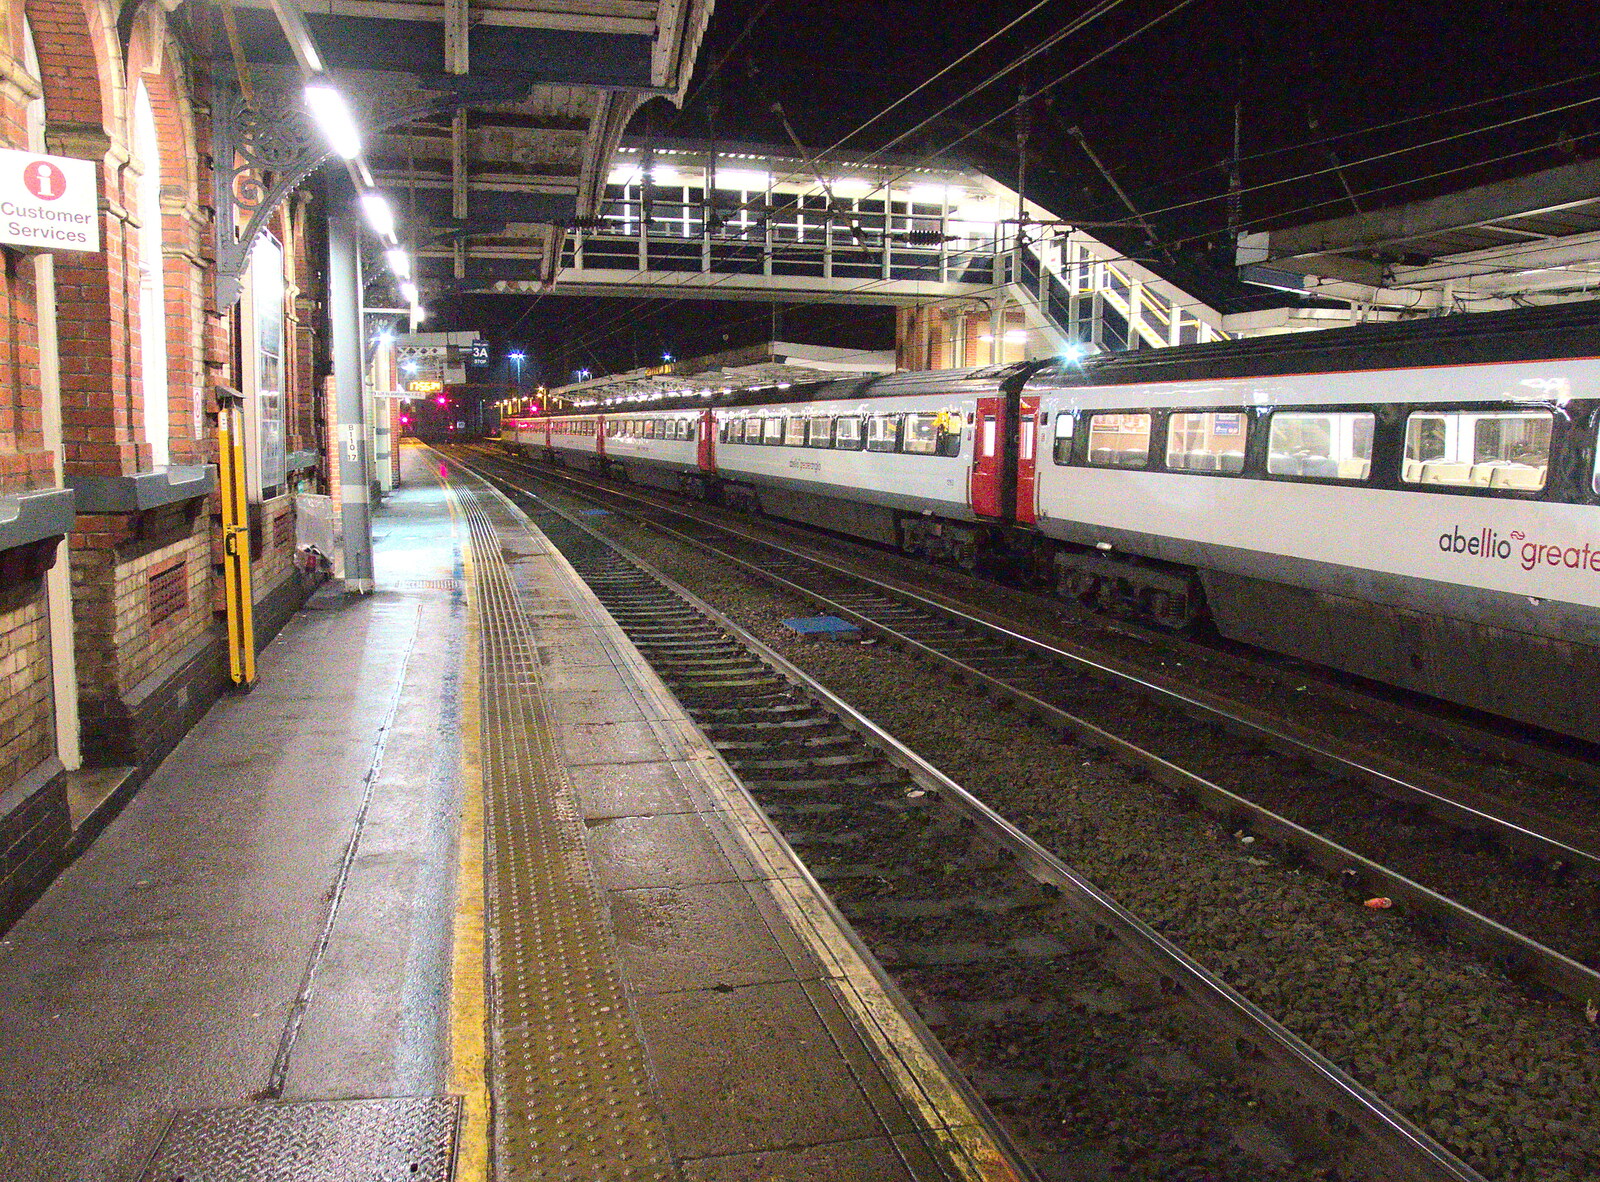 The train to London waits on Platform 1 from Isobel Goes to Lyon, Ipswich Station, Burrell Road - 24th January 2016